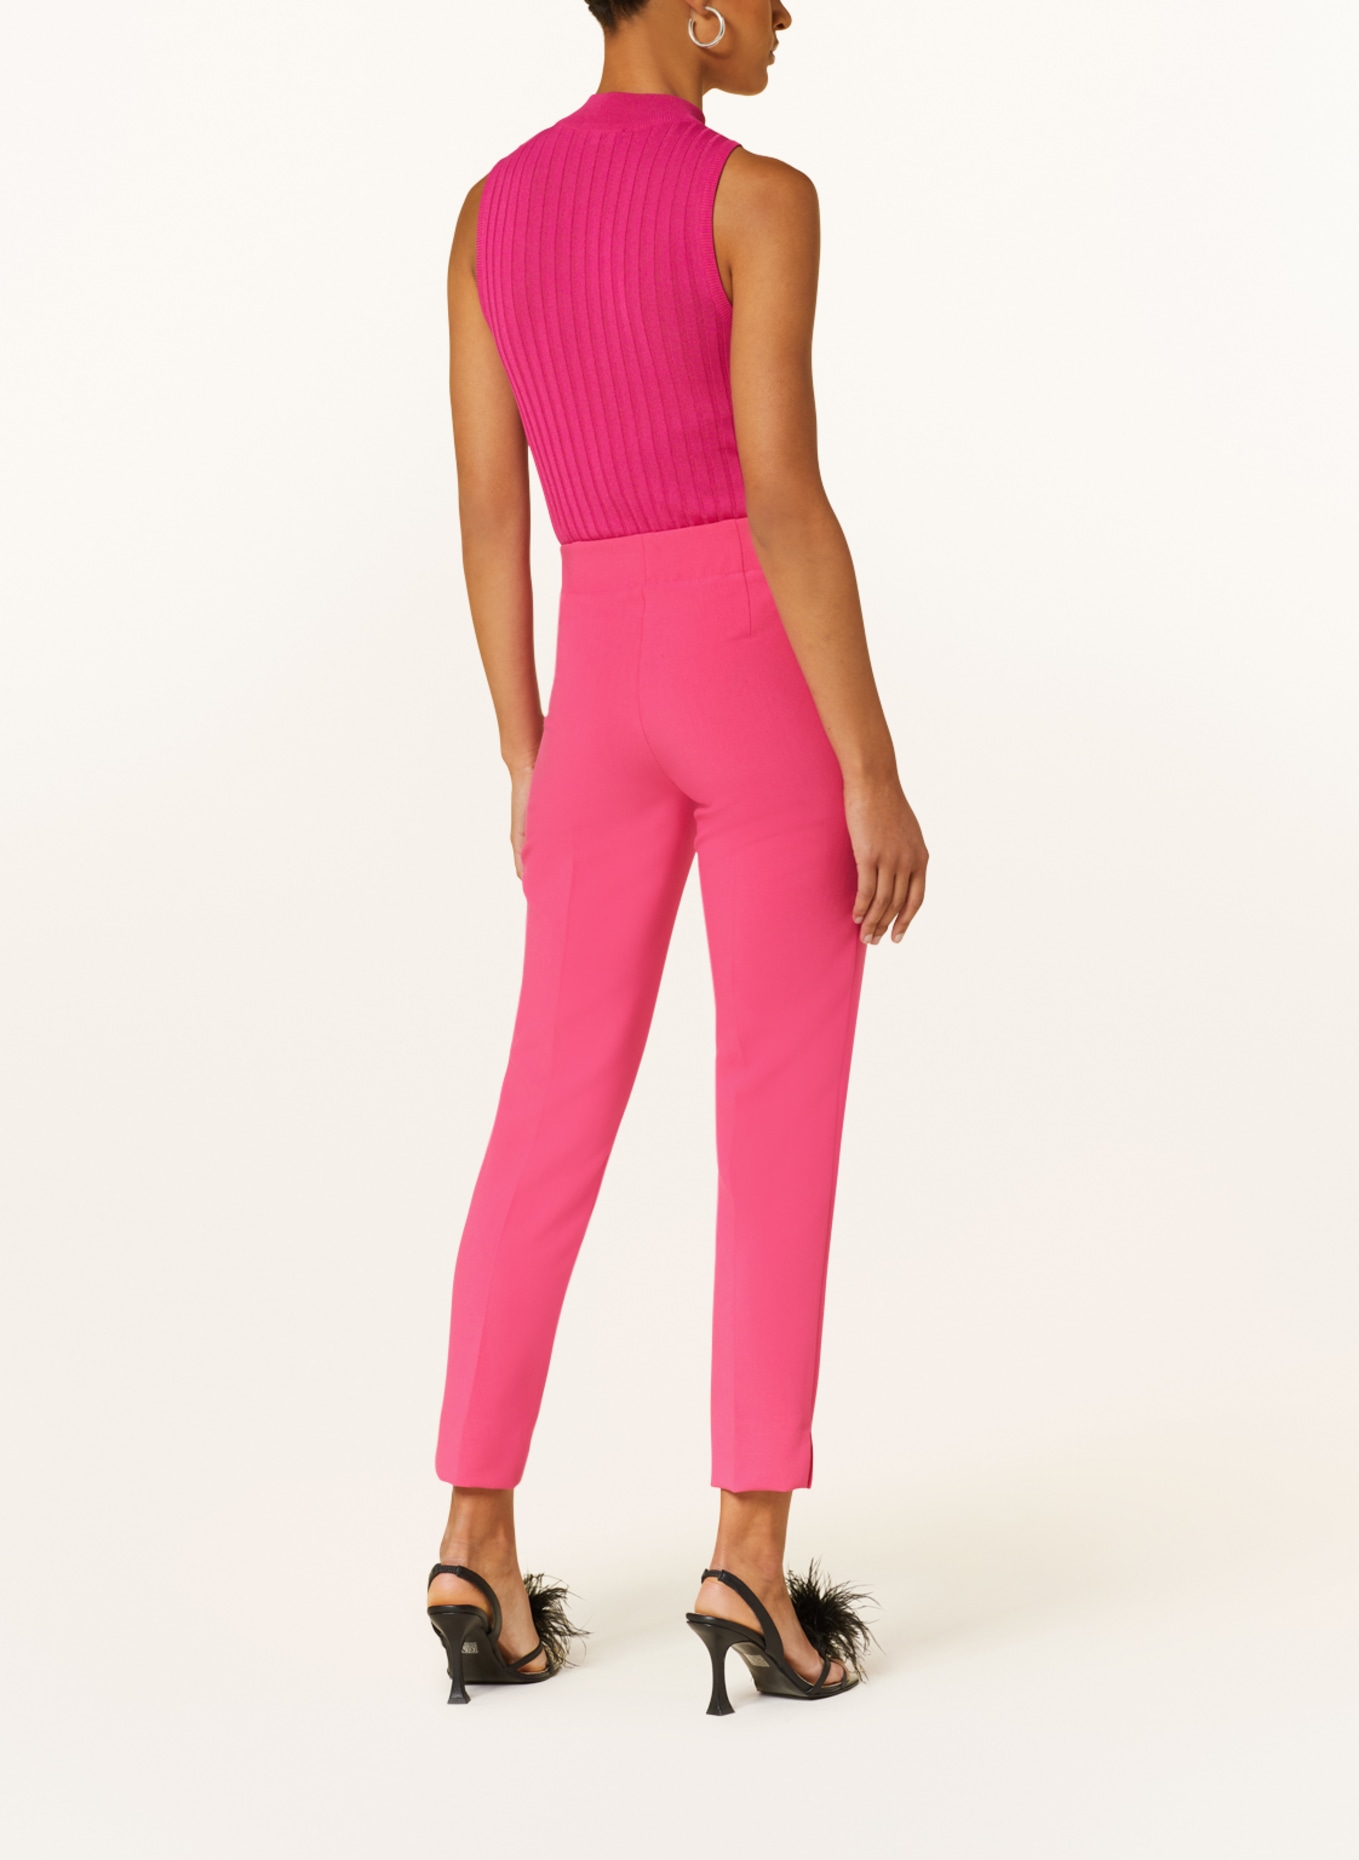 RIANI Knit top with cut-out, Color: PINK (Image 3)